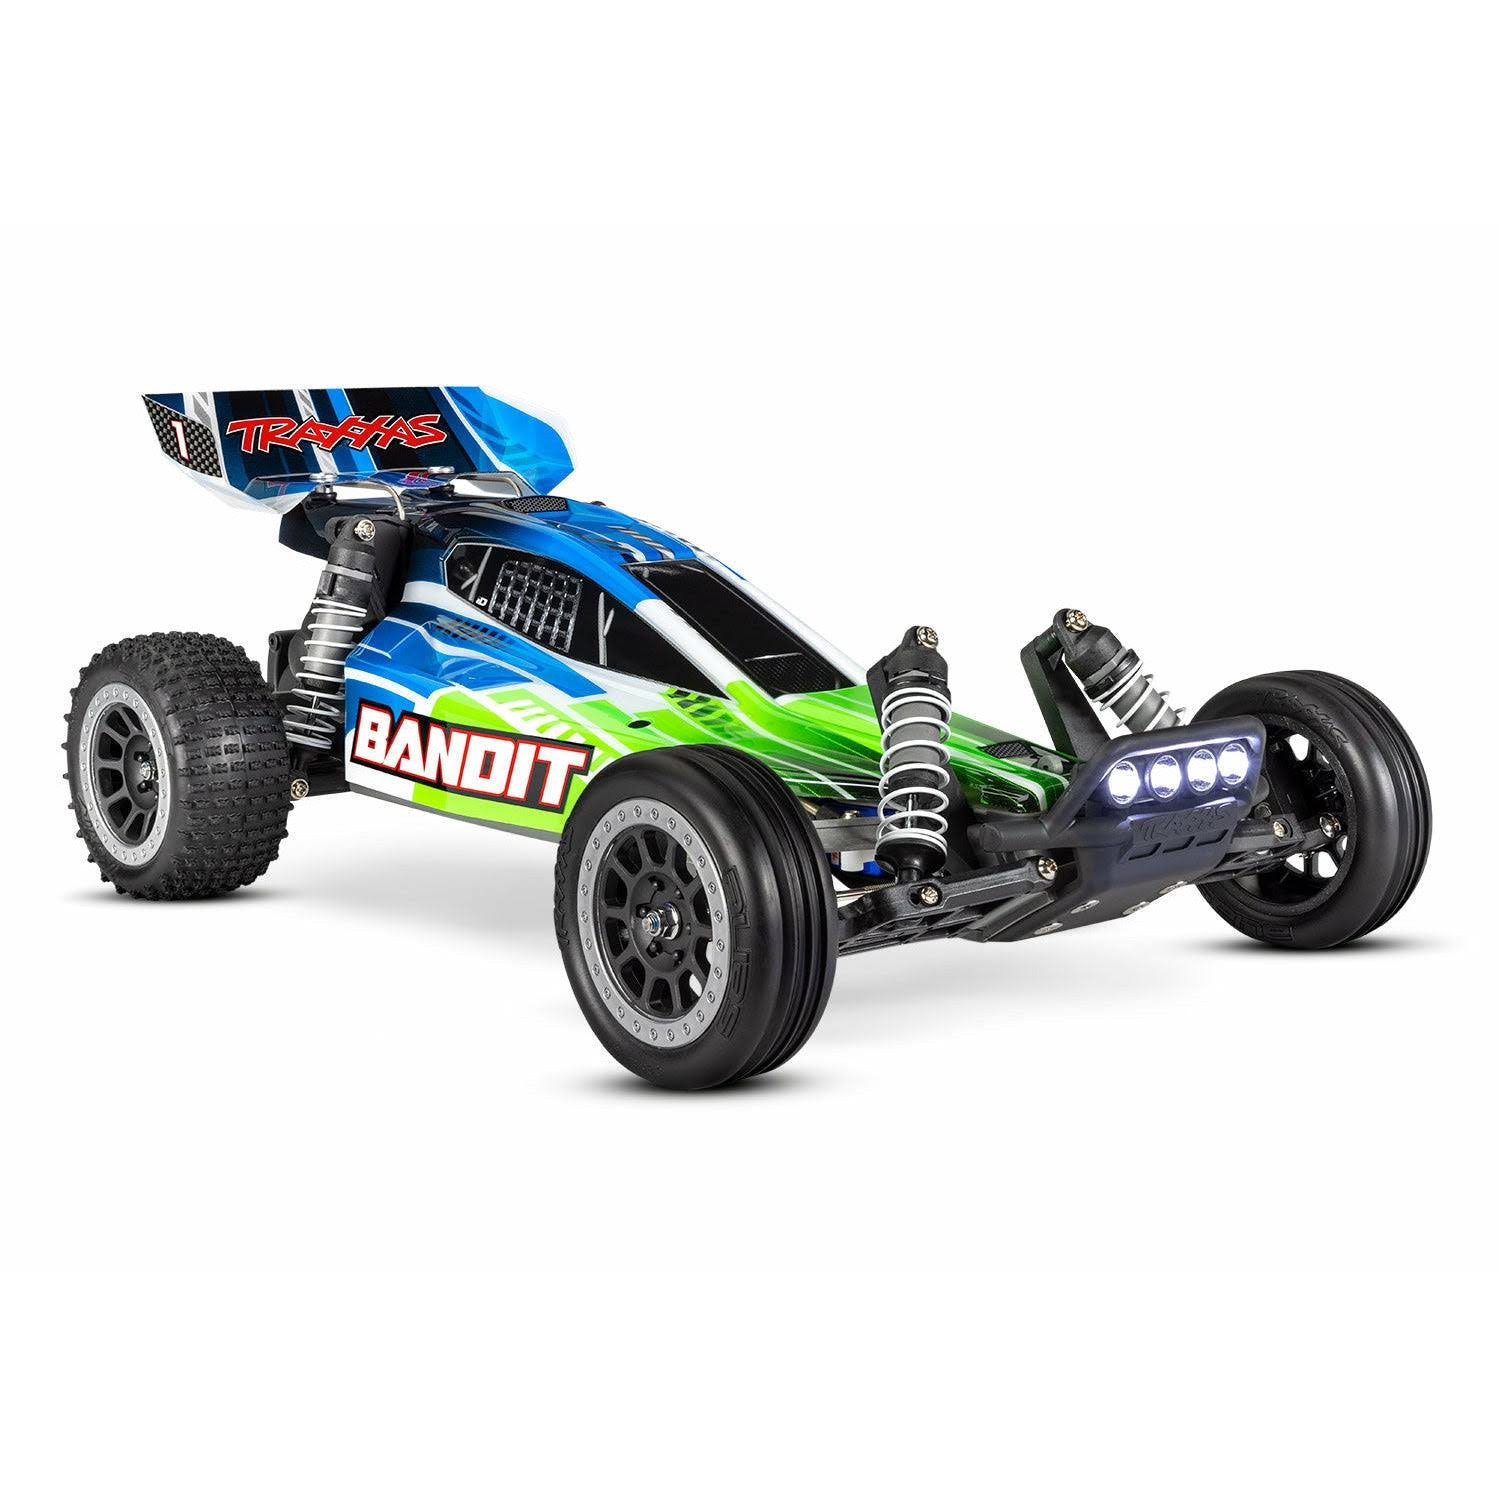 TRAXXAS TRA 24054-61-GRN Bandit : 1/10 Scale Off-Road Buggy. Ready-To-Race with TQ 2.4 radio system, XL-5 ESC (fwd/rev), and LED lights. Includes: 7-